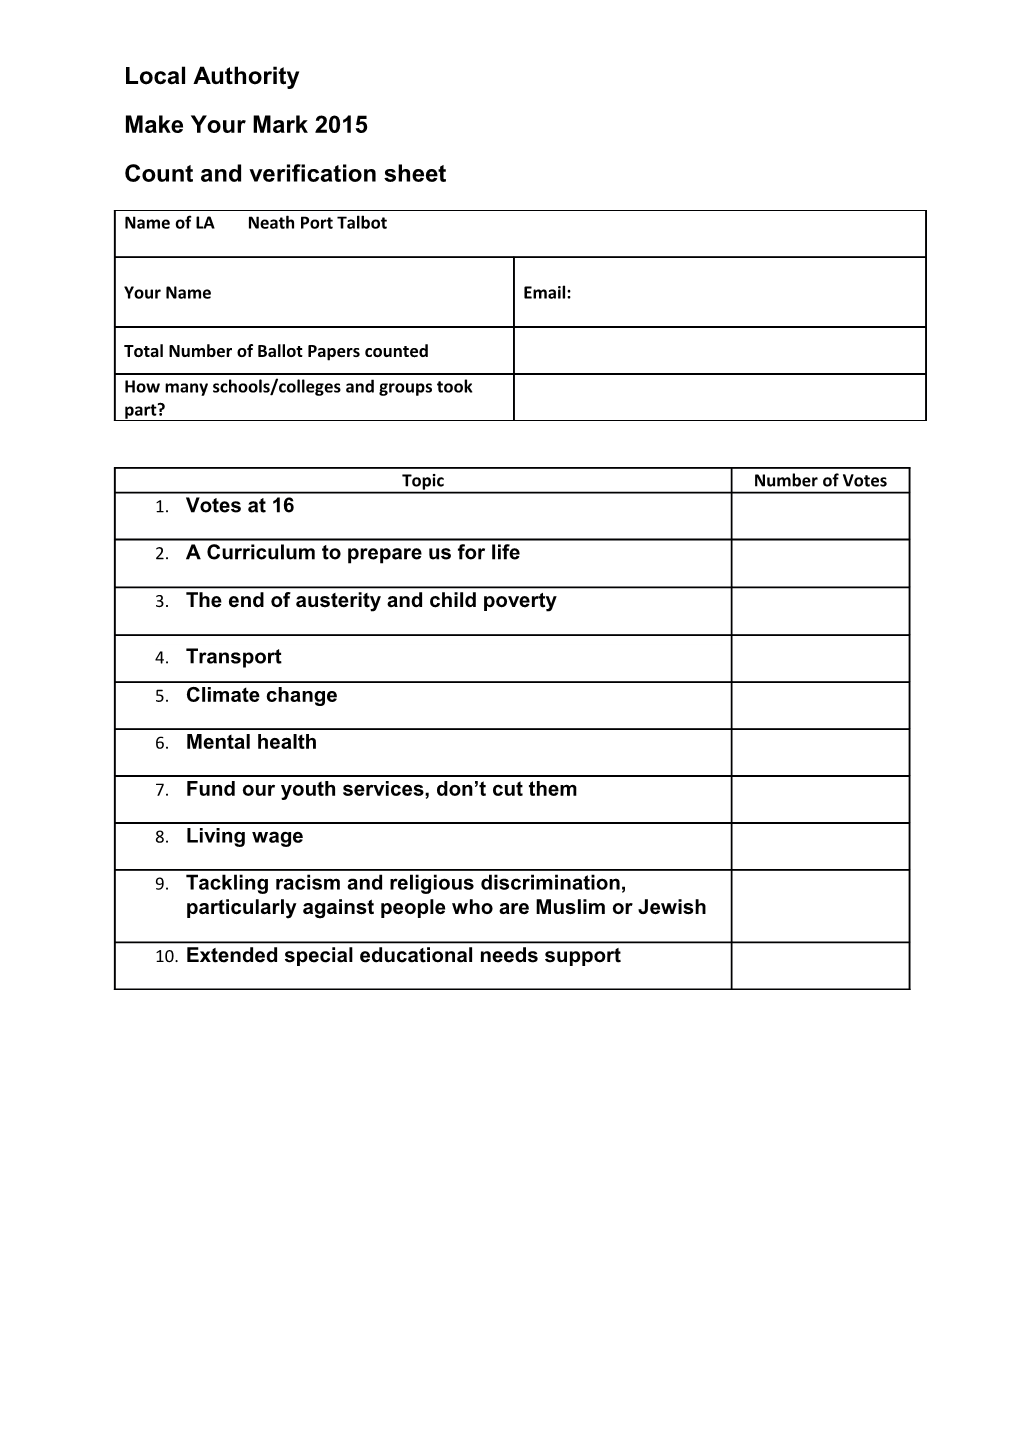 Count and Verification Sheet s9